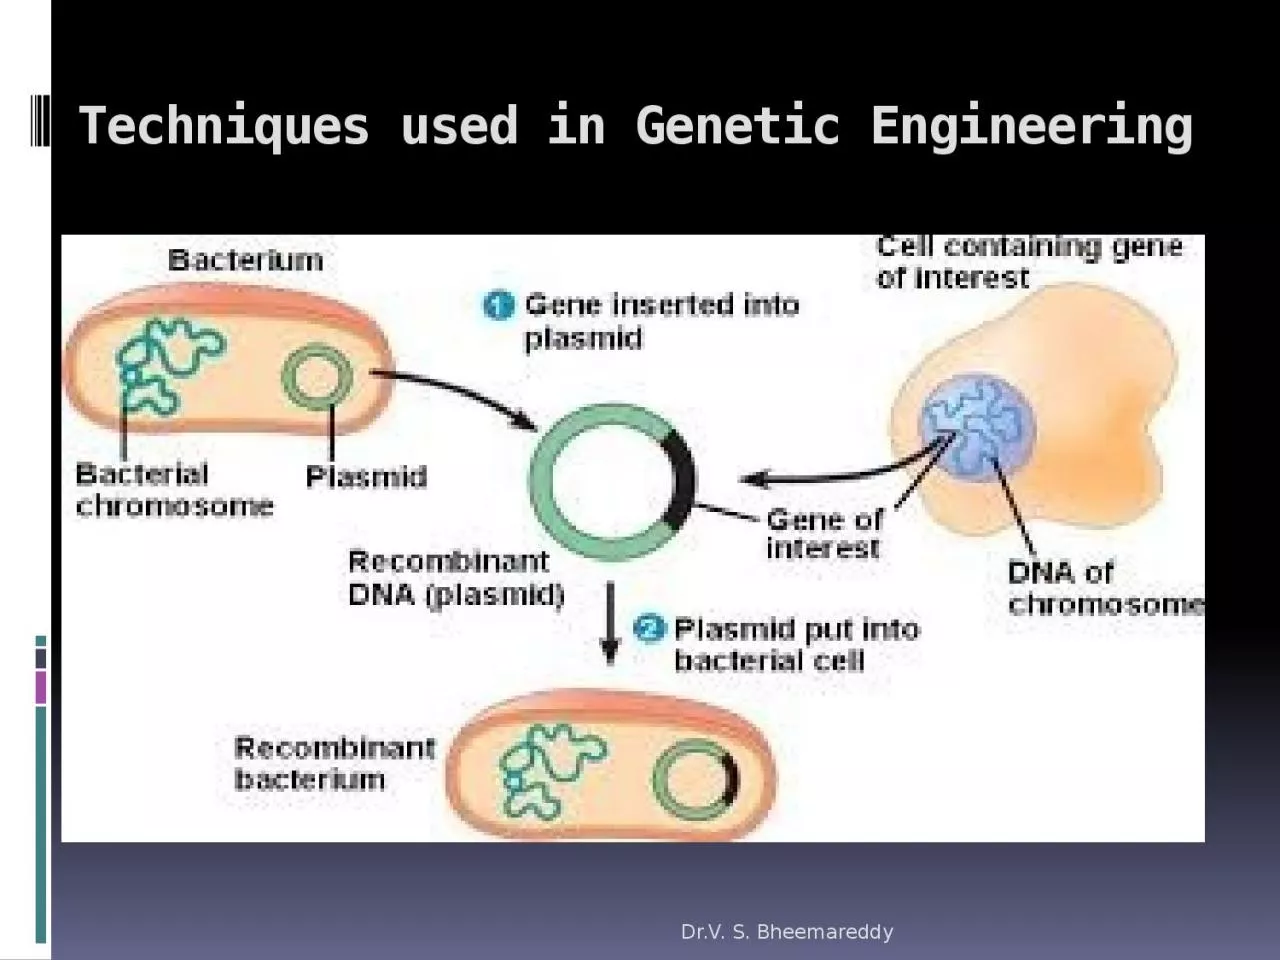 Techniques used in Genetic Engineering